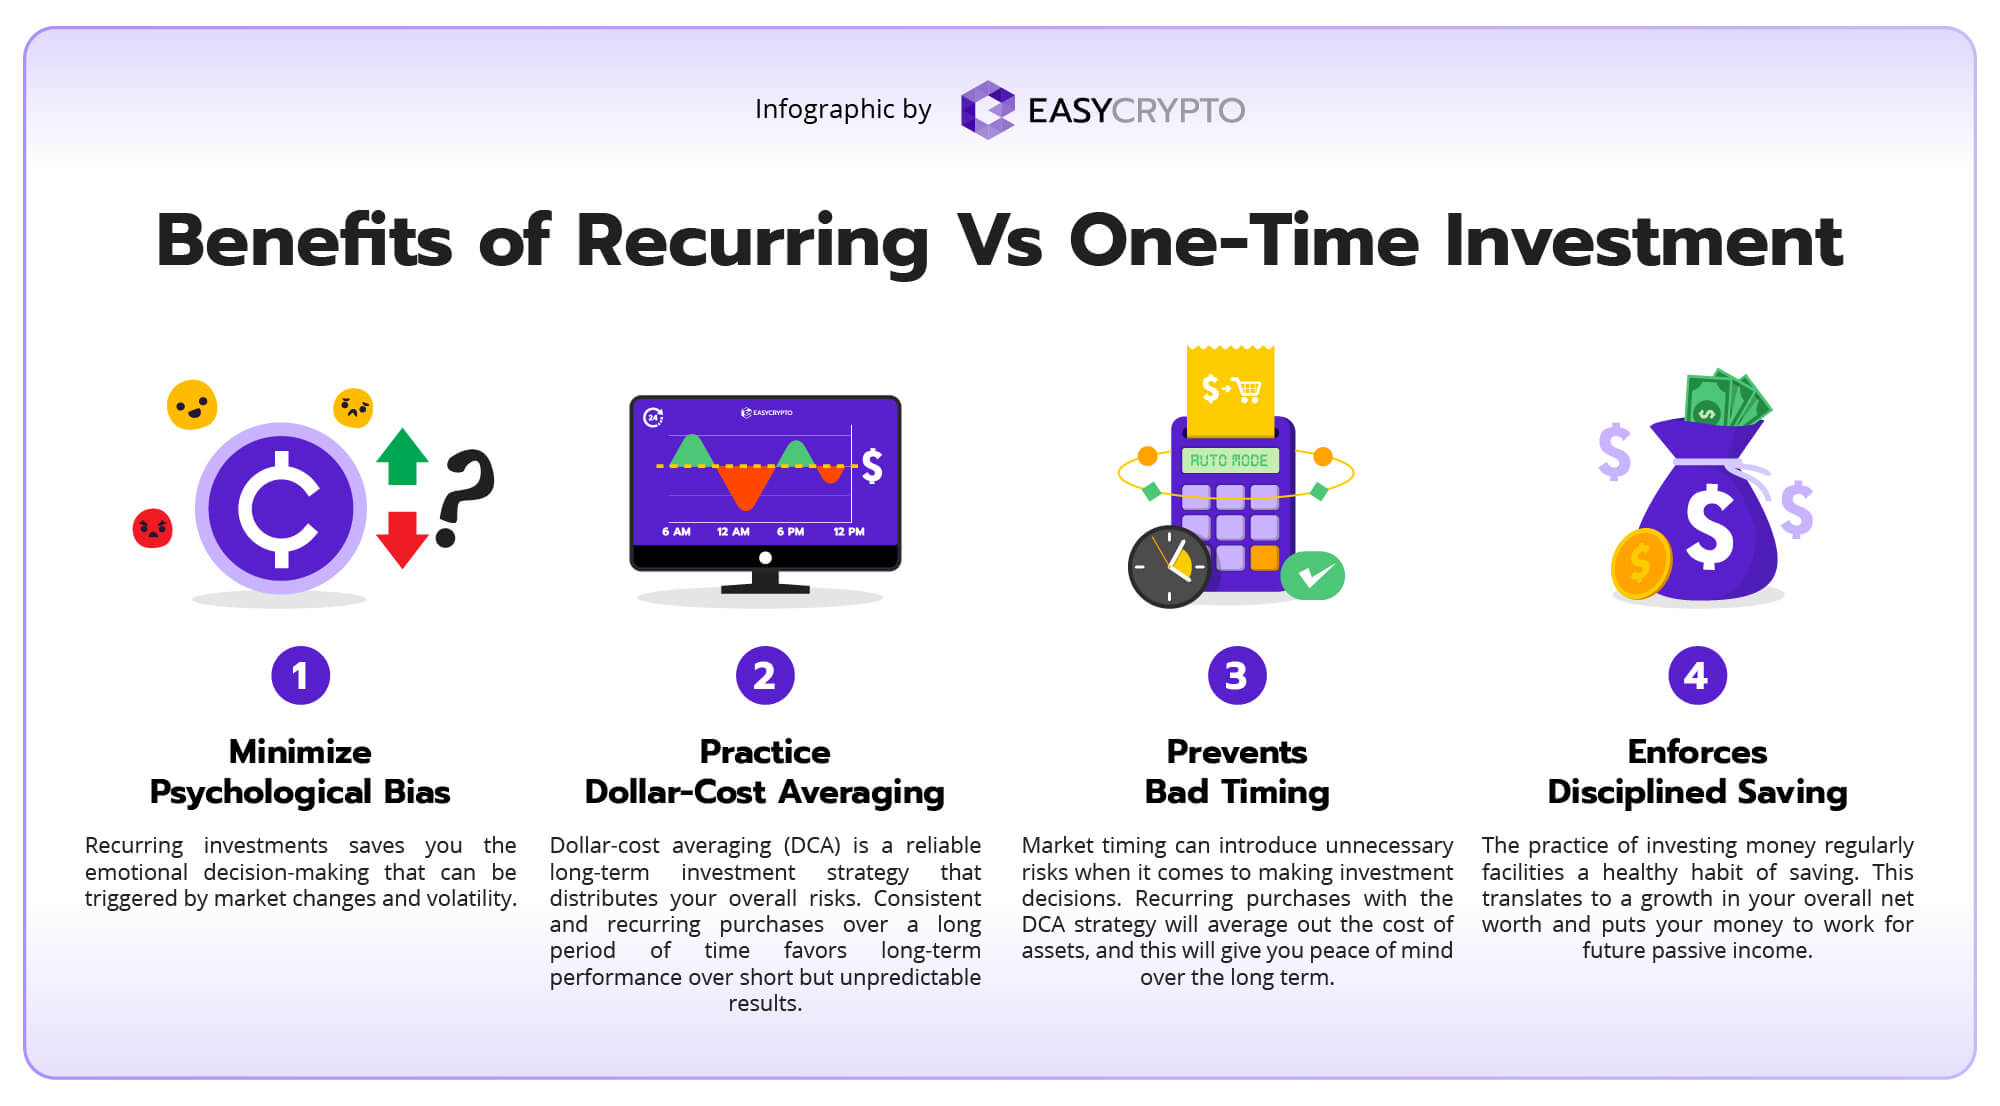 Infographic content explaining the benefits of recurring vs one-time investment.